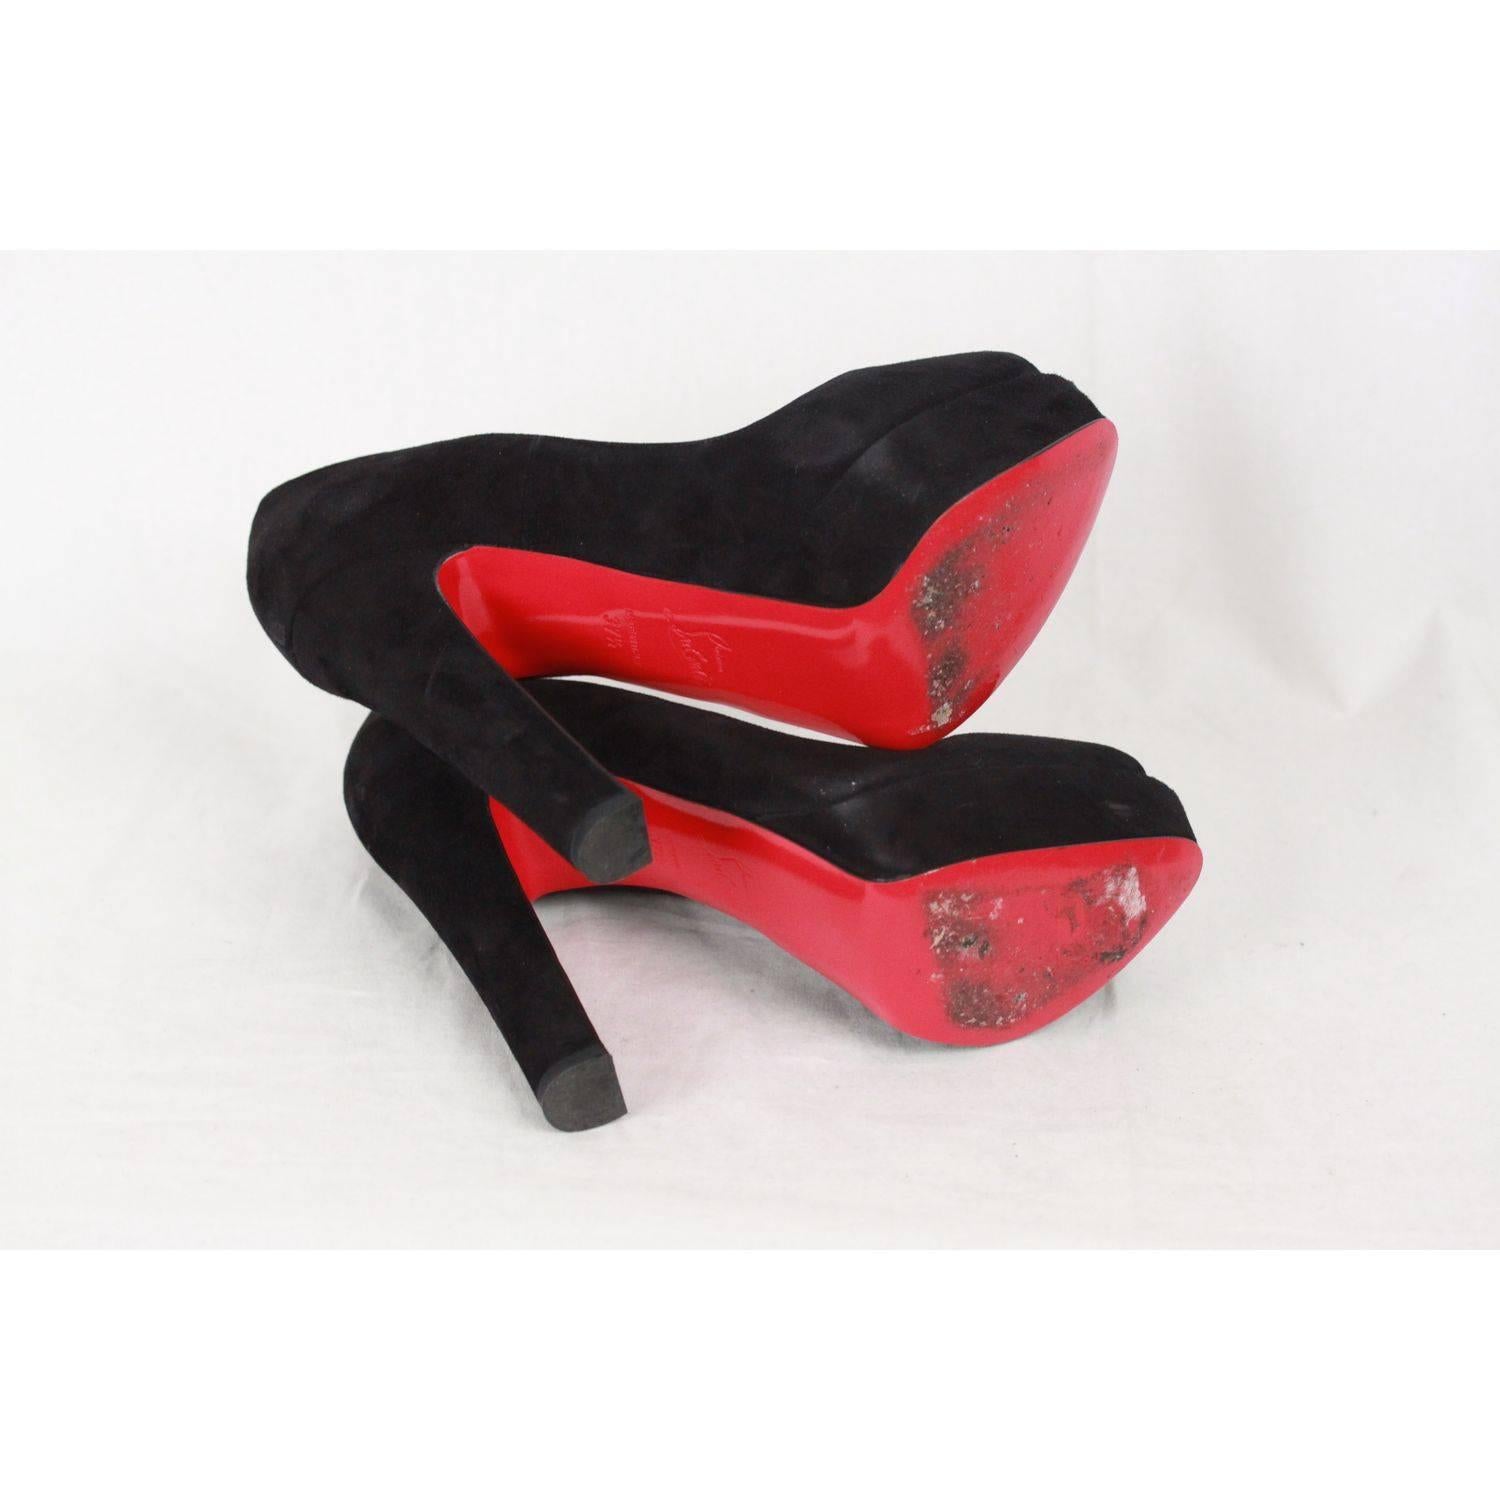 Christian Louboutin Black Suede Open Toe Shoes Bambou 140 Heels 37.5 In Good Condition In Rome, Rome